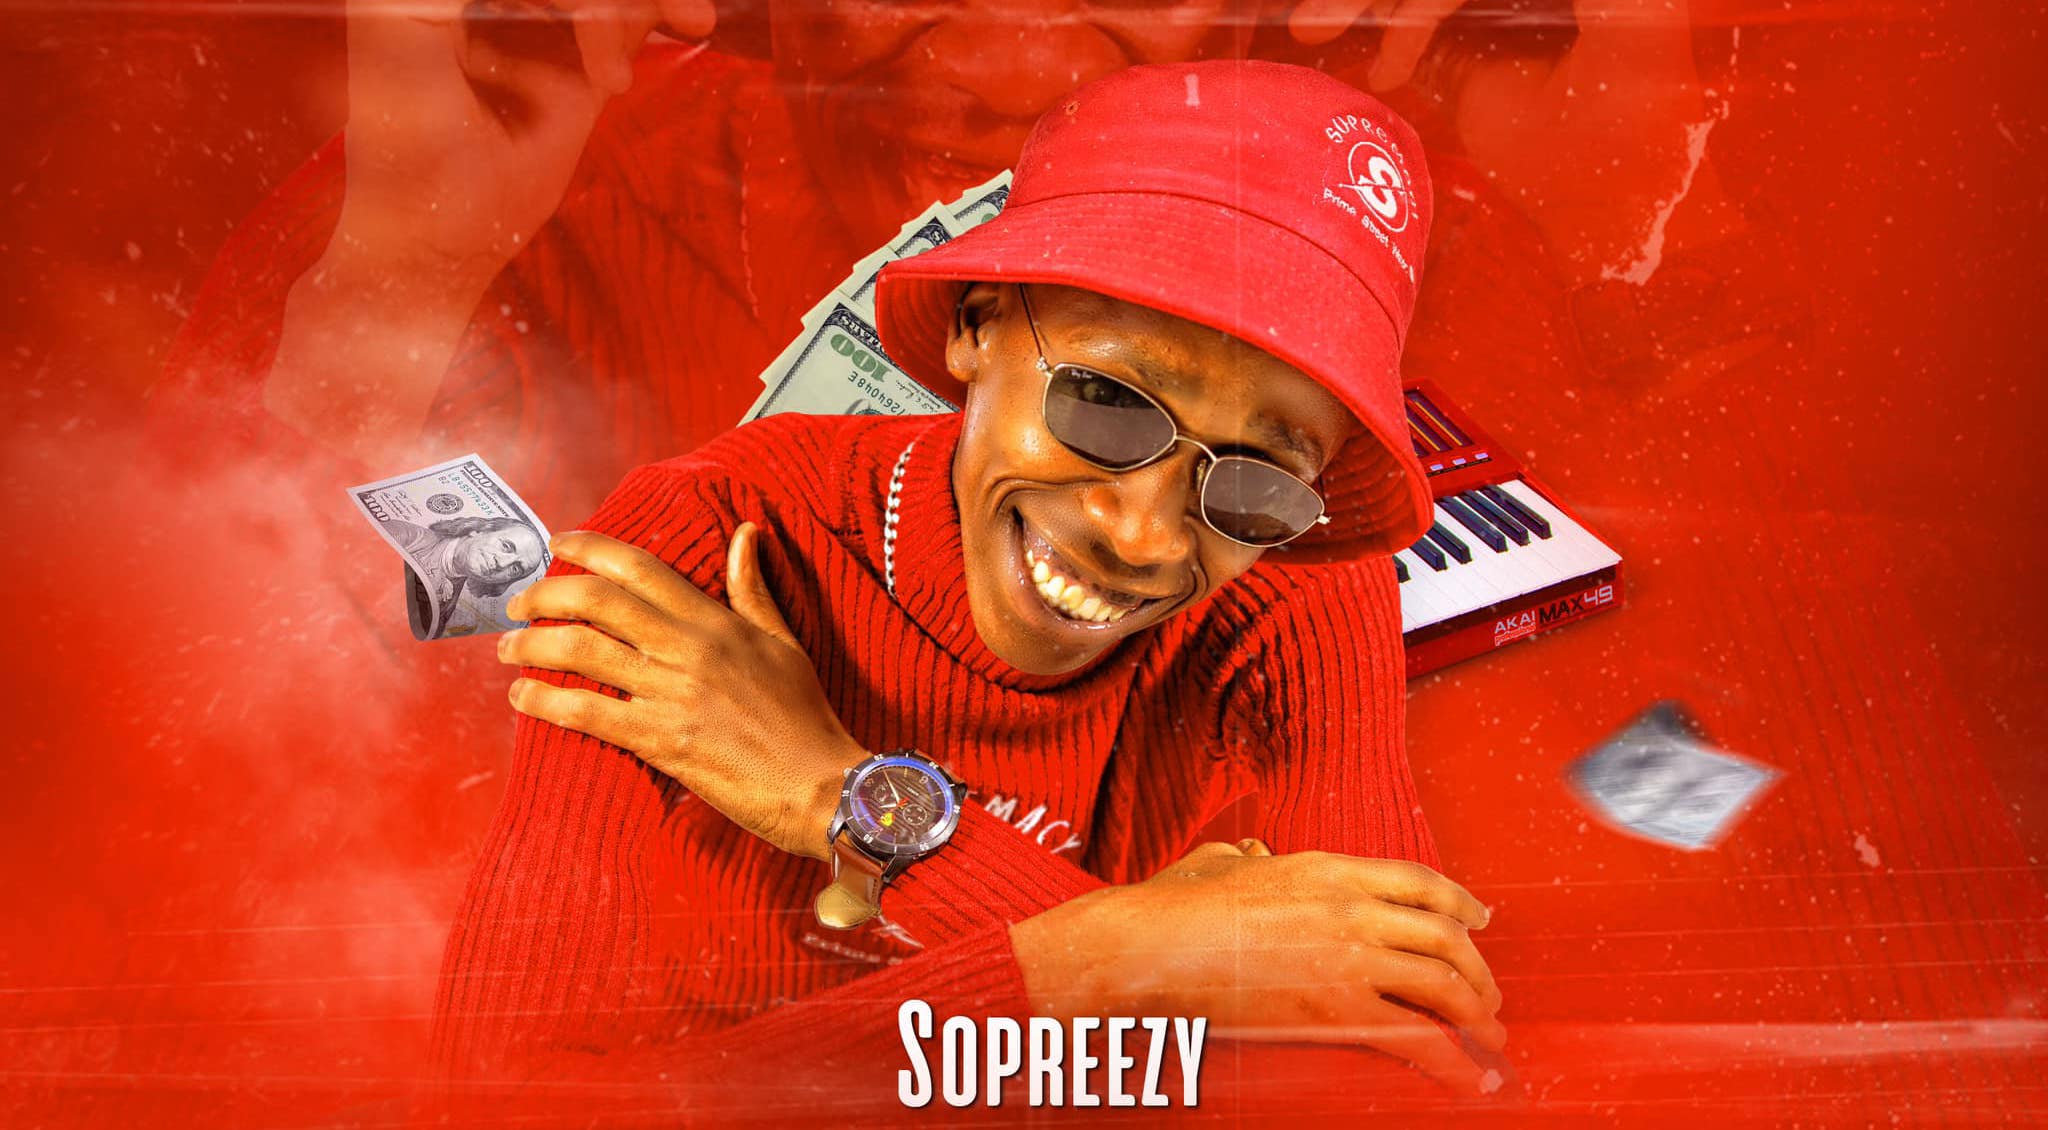 Sopreezy: A rising music artist to watch